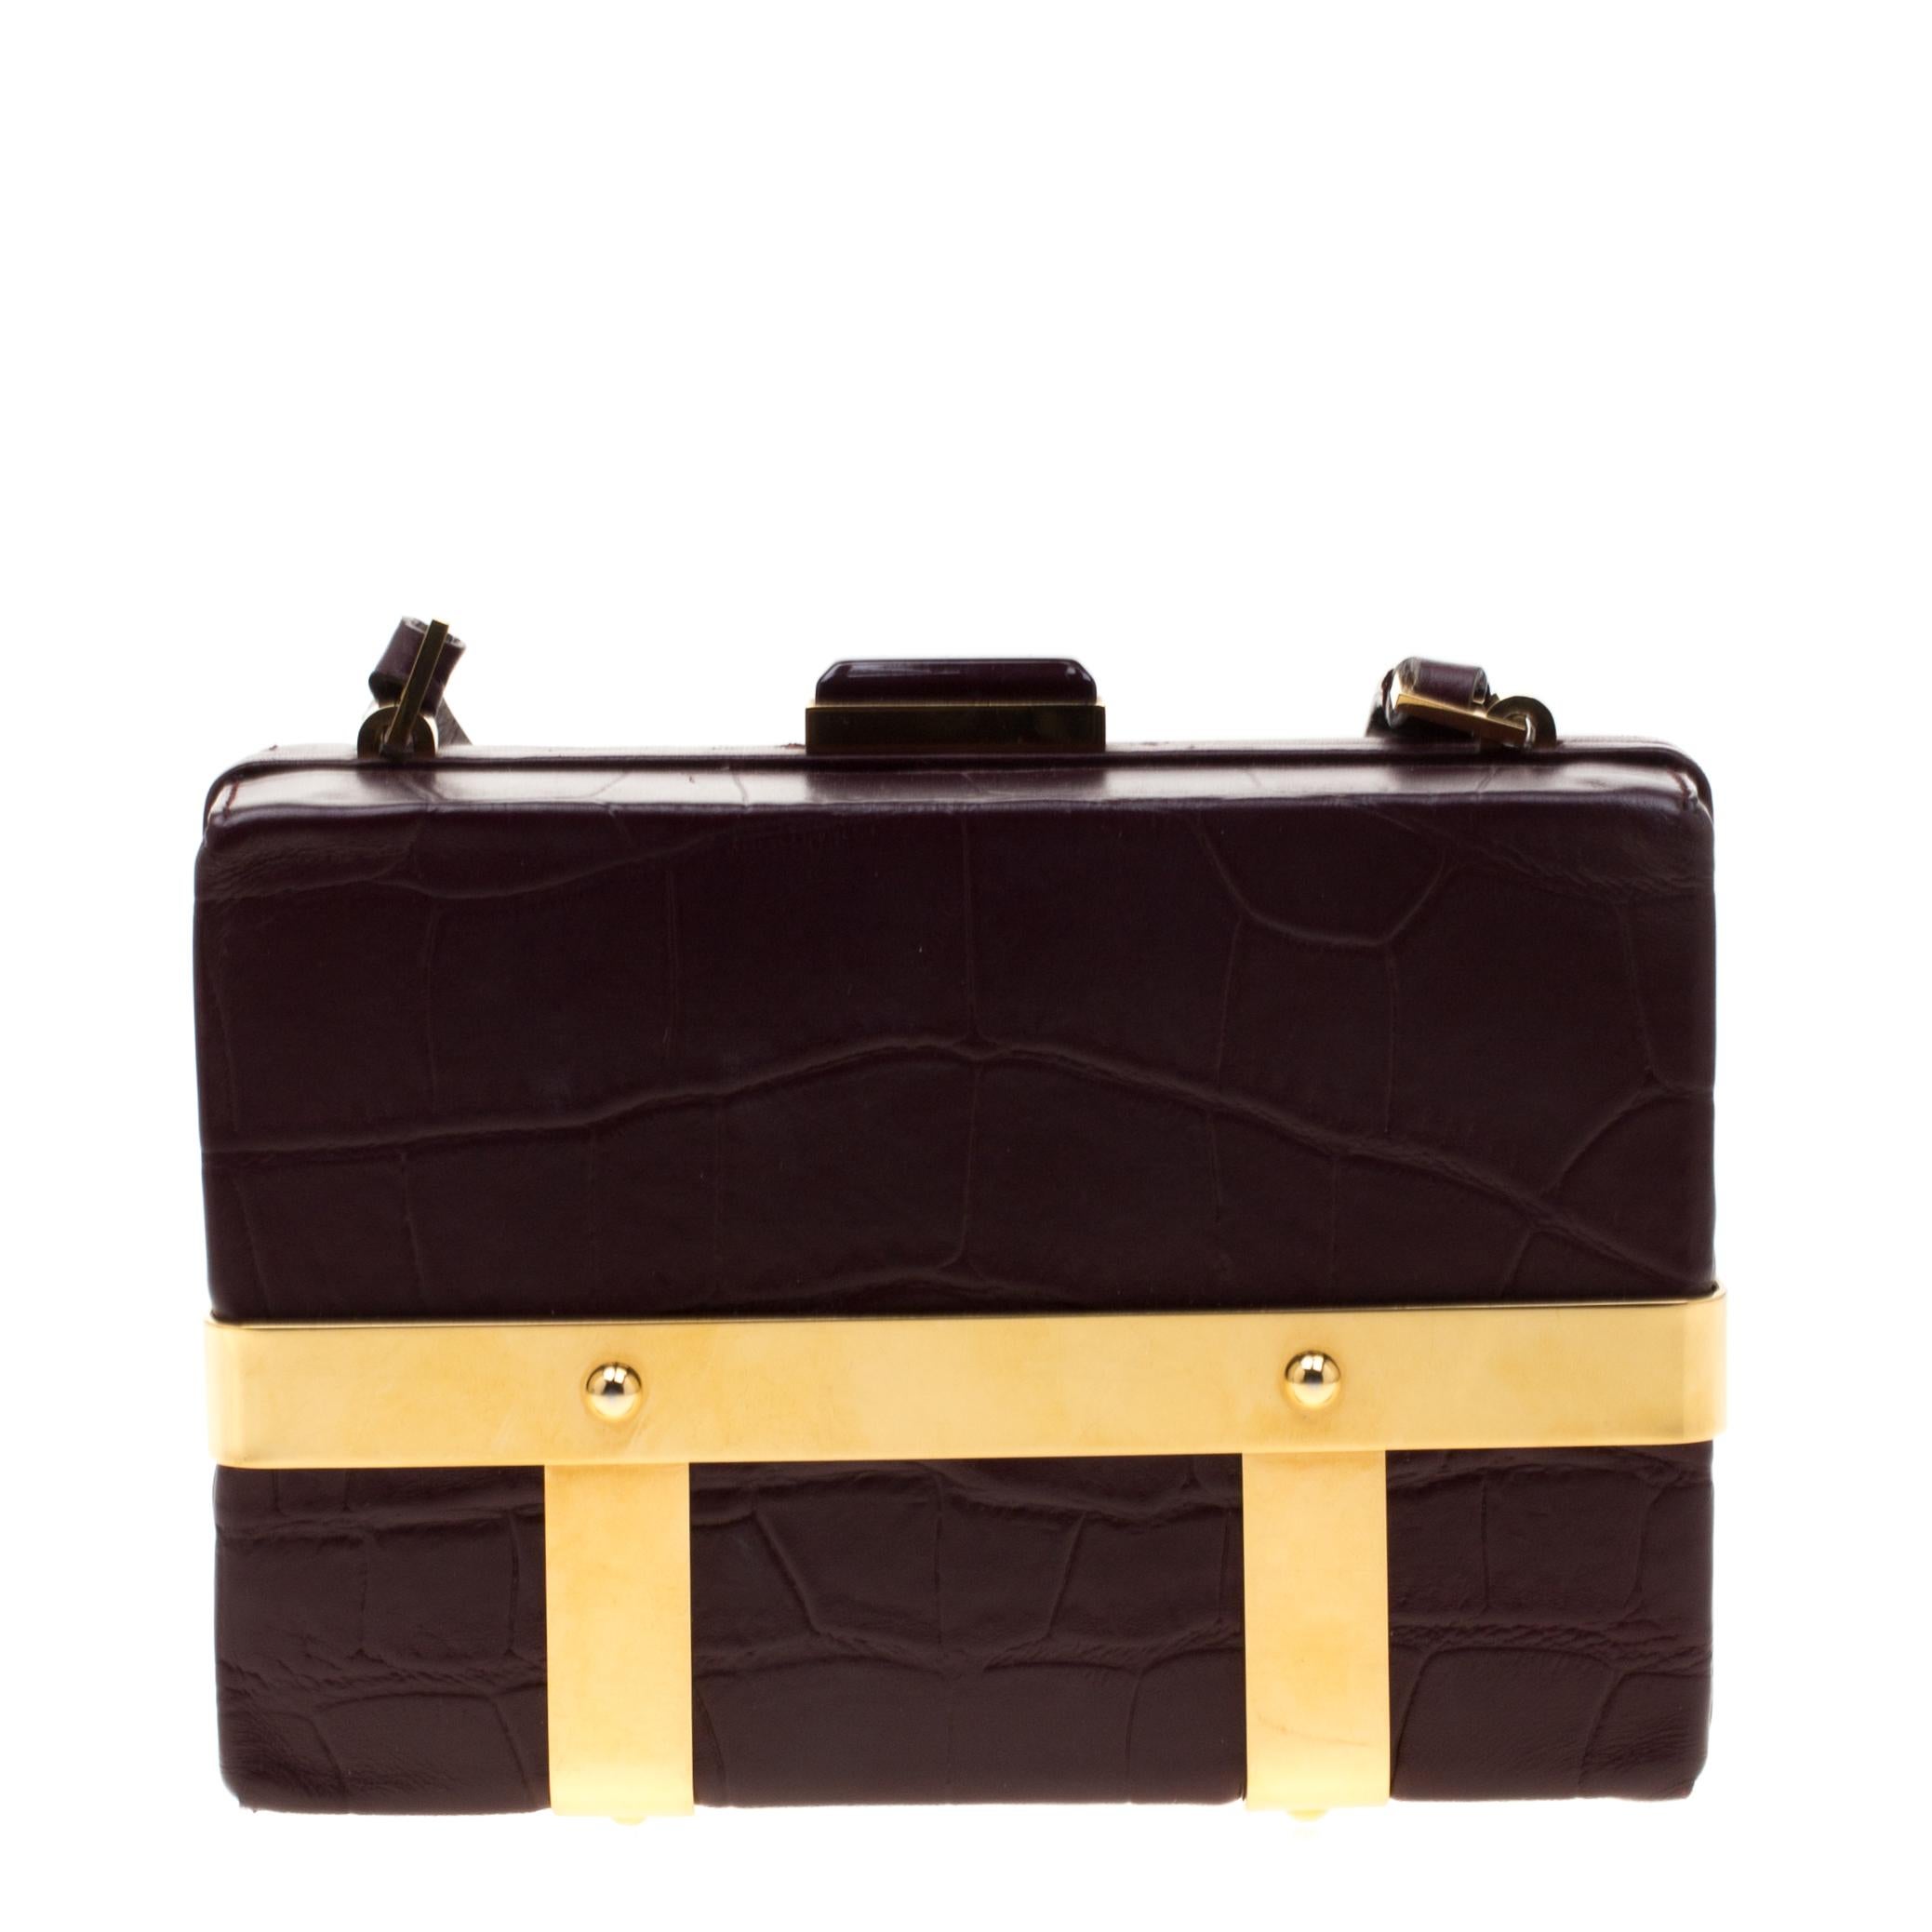 From the house of Alexander McQueen comes this gorgeous box bag that will perfectly complement all your outfits. It has been luxuriously crafted from croc-embossed leather and styled into a box shape with sharp edges and gold-tone metal trims that